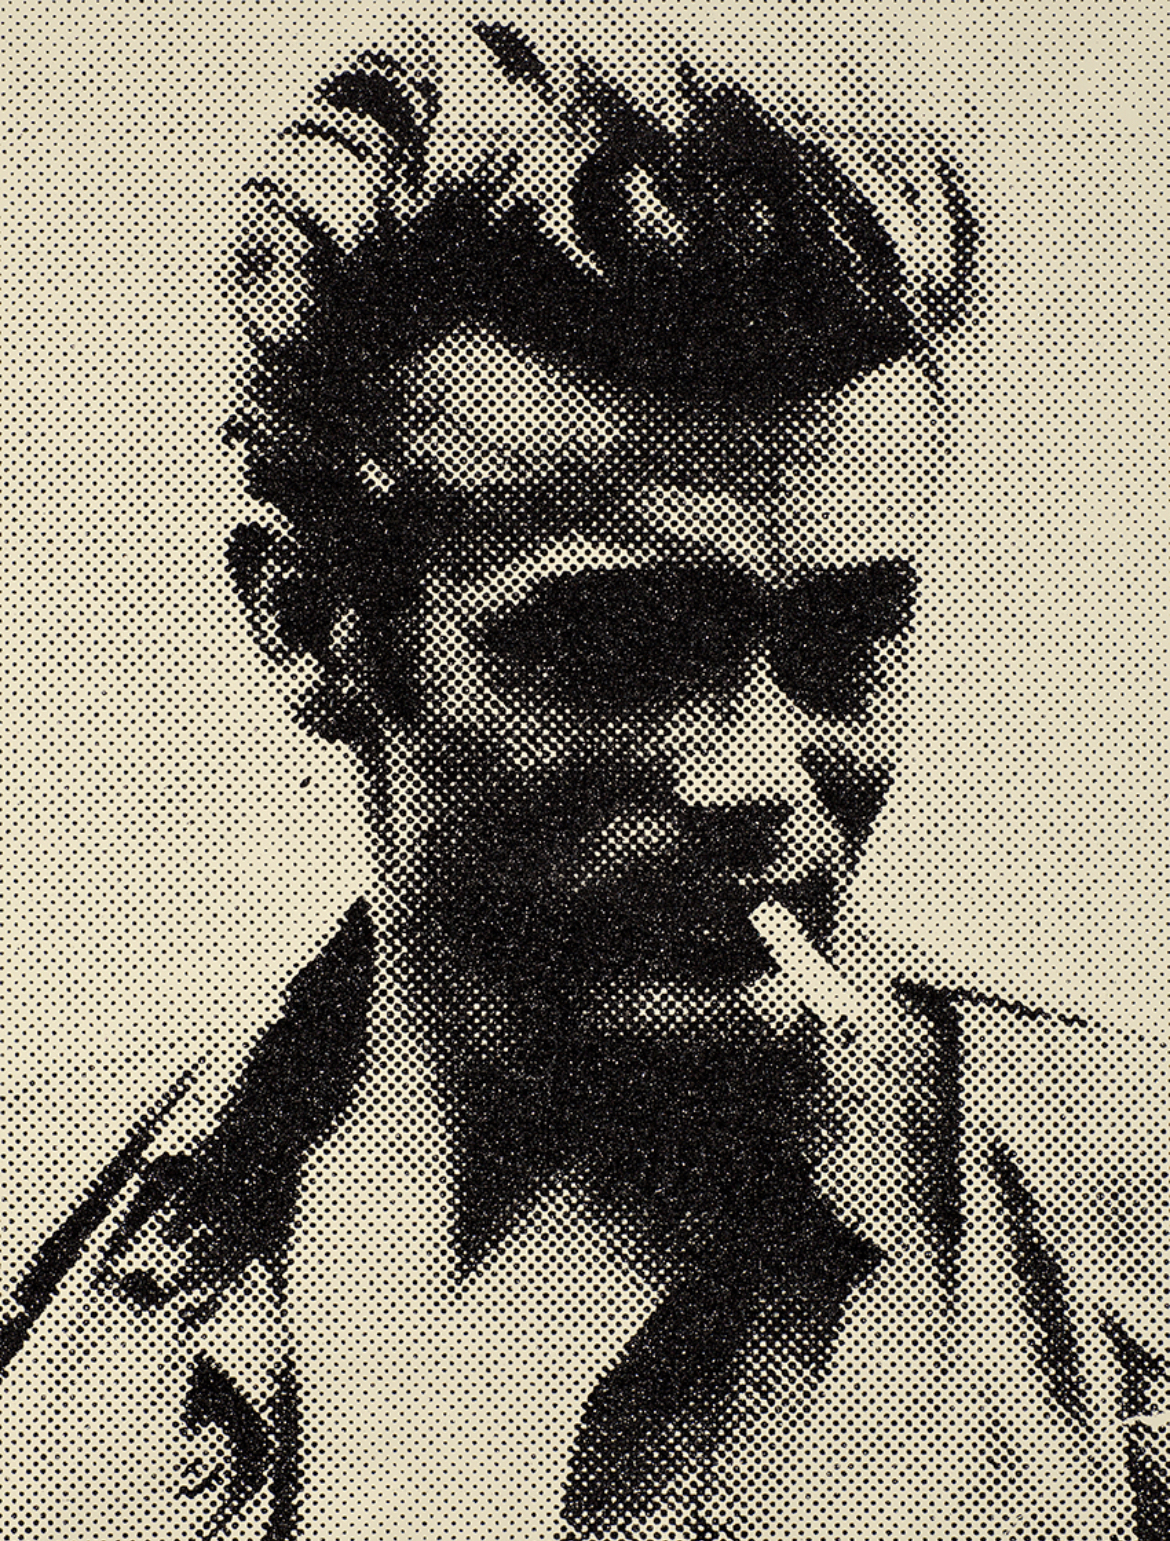 Russell Young "James Dean" at The Whiteroom Gallery